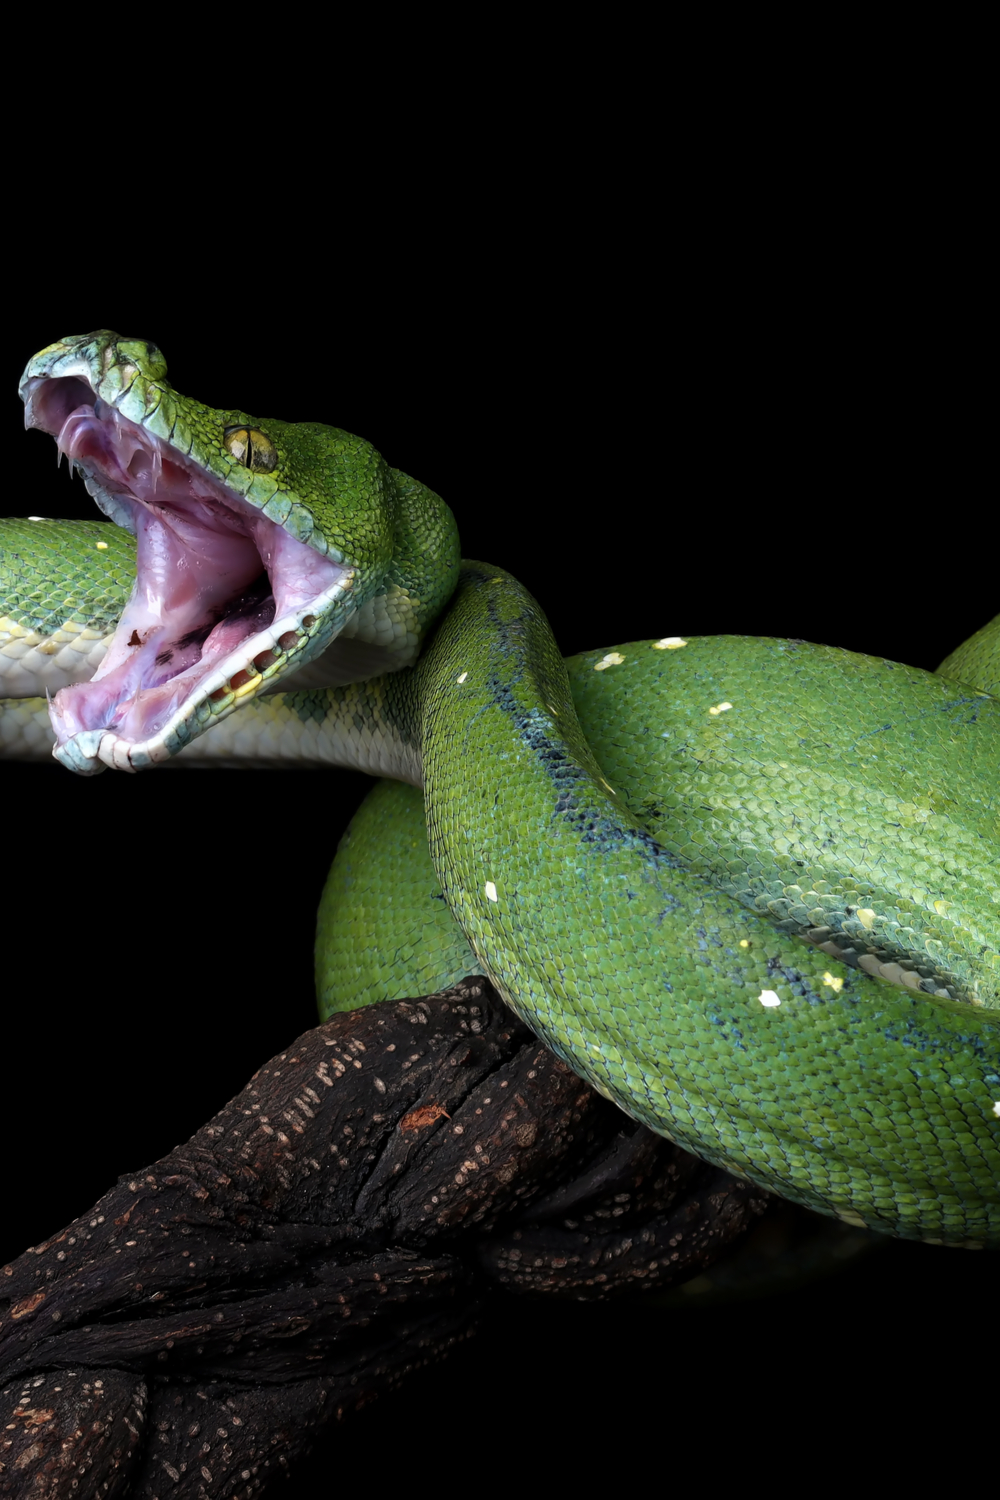 Green snake chasing or attacking you